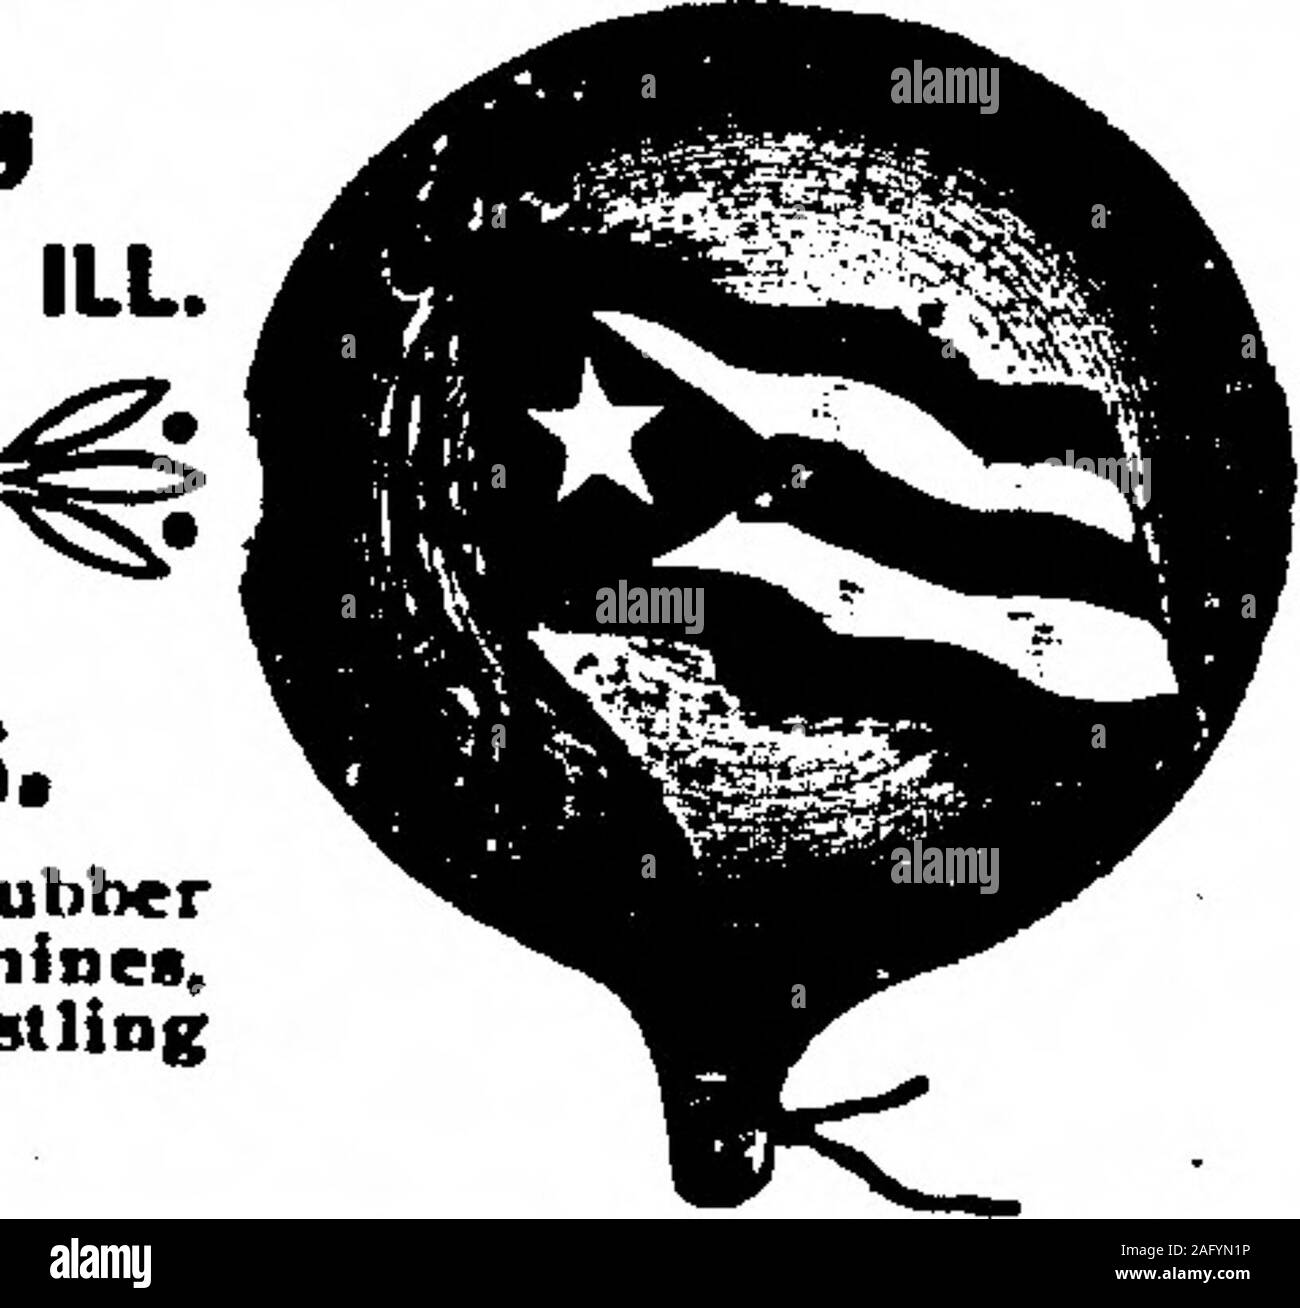 . Billboard (Jan-Jun 1899). Q. NERVIONE, 66 N Franklin St., CHICAGO, ILL # Toy Manufacturer, Wholesaler of Rubbtr Toy BALLOONS. Finest Assortment of Fresh RubberOoodÂ«. Hydrogen Inflating Machines,Illuminating Gas Bellows. WhistlingBalloons. Whips, Novelties, etc.We solicit your correspondence.. PRIZE MEDALS CUPS. PINS, TROPHIES, &C. Designs free on receipt of particulars JOHN HARRIOTT,3 Winter Street, BOSTON, MASS. H3BBA8KA ALBION. NEB.âBoone County AgriculturalAssociation. Sept 20 to 22. L. P. JuddCedar Rapids, pres.; D. J. Poynter, treas.;H. L. Brooks, secy. FRANKLIN, NEB.âFranklin County A Stock Photo